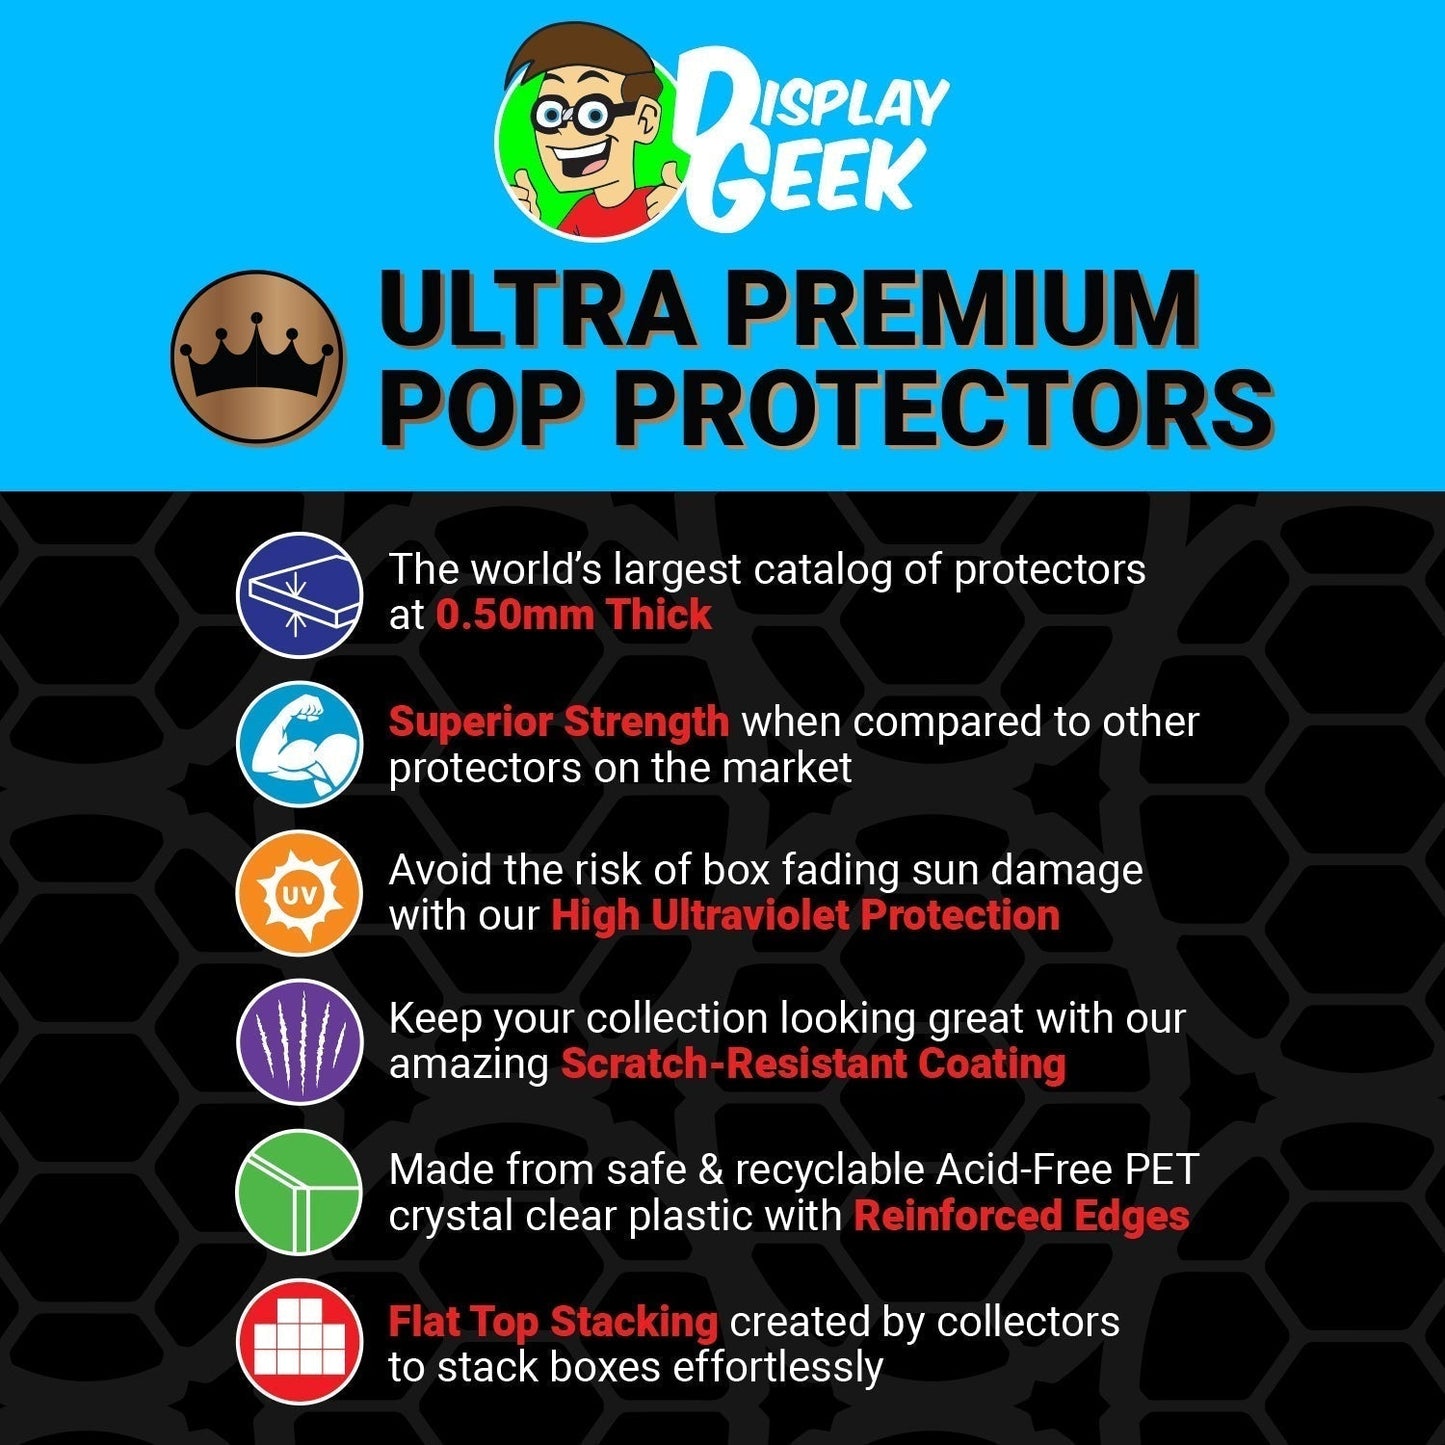 Pop Protector for Jason Williams #06 Funko Pop Magazine Covers - PPG Pop Protector Guide Search Created by Display Geek